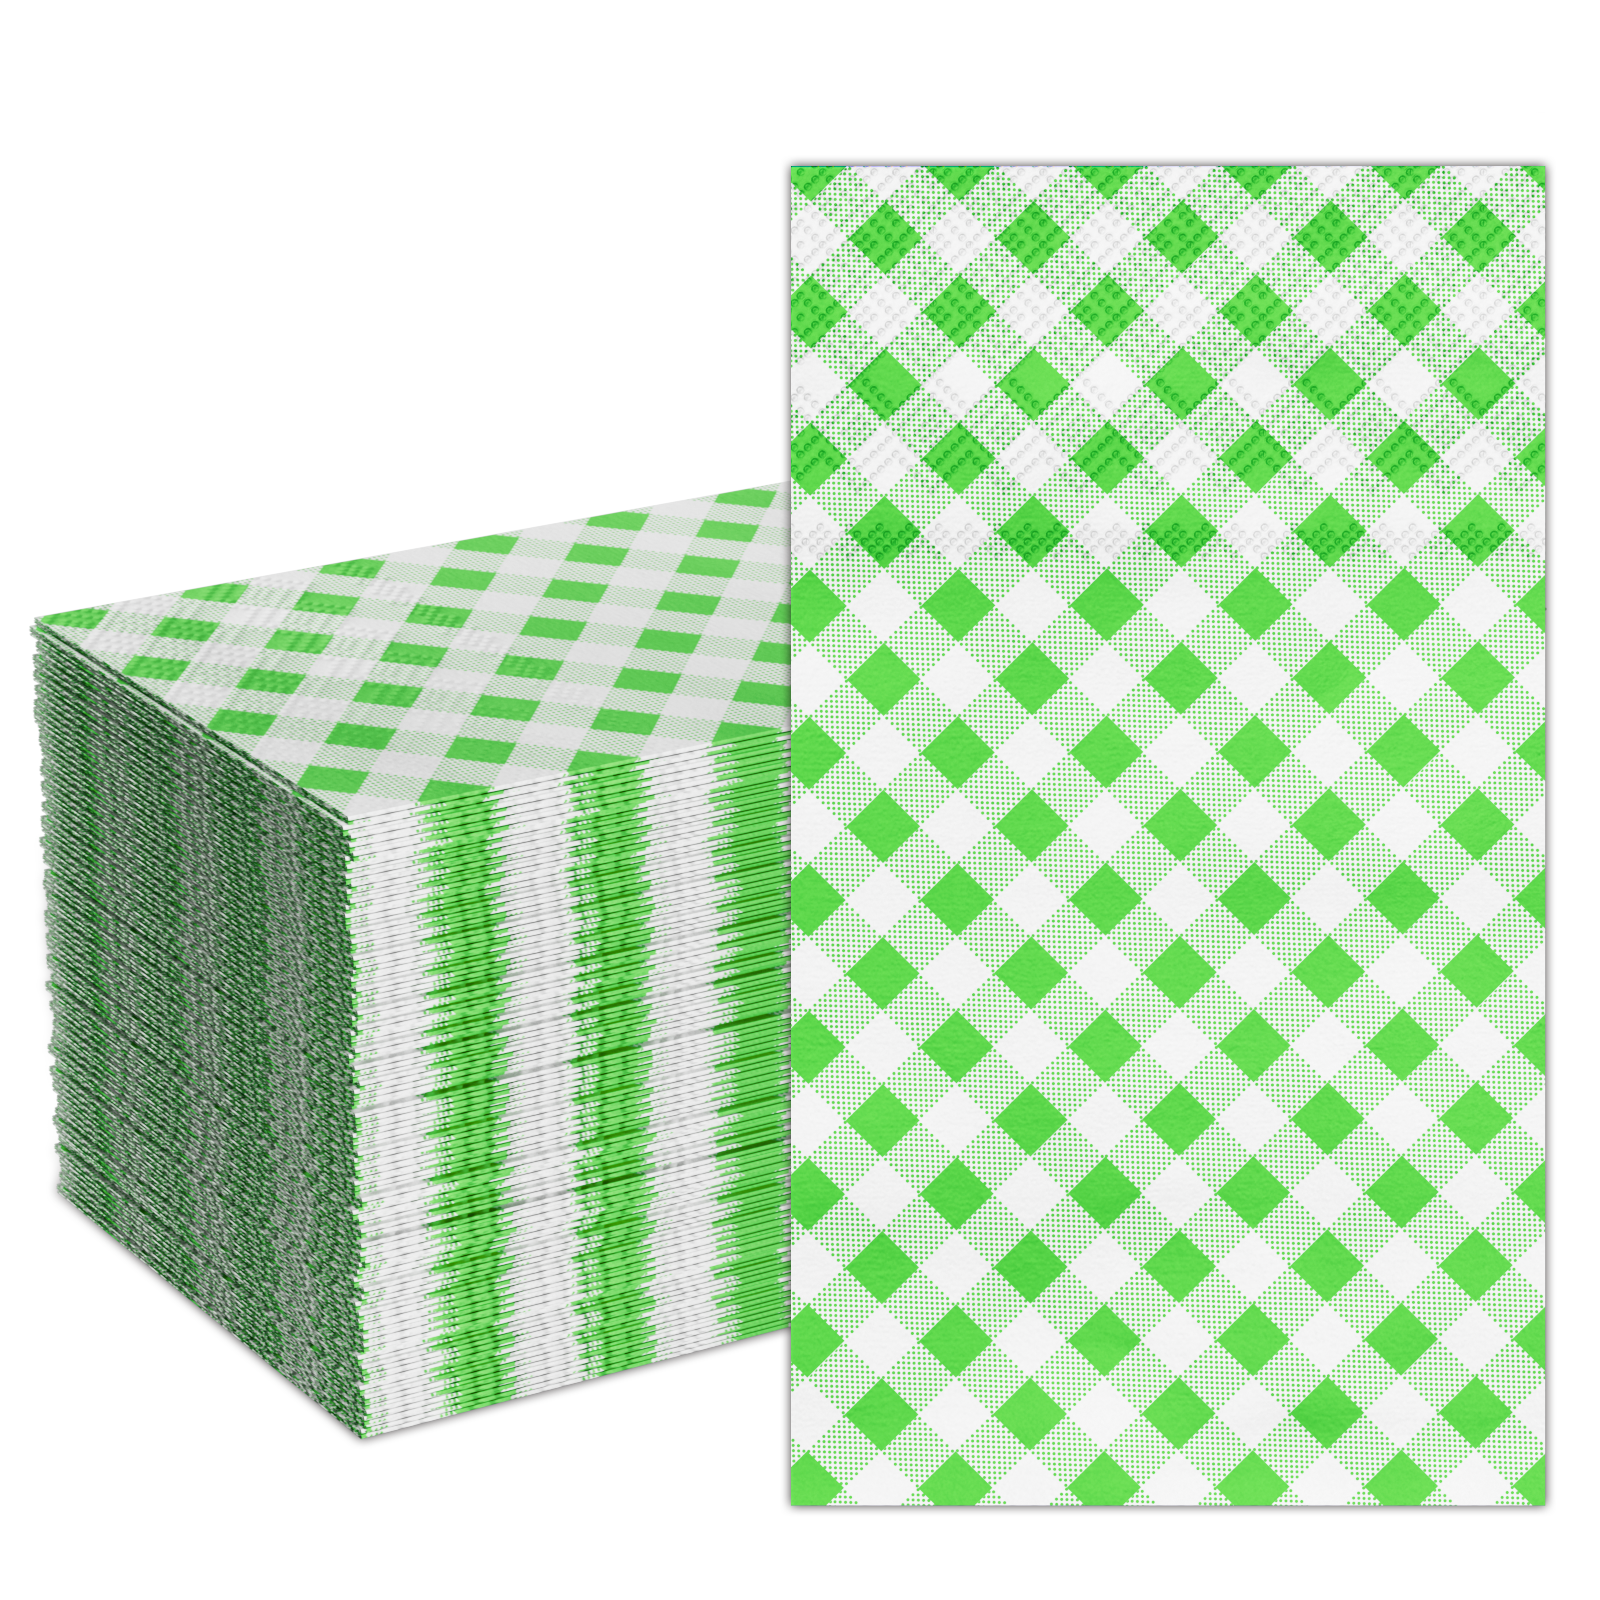 DYLIVeS 80 Count Guest Napkins Green Napkins Buffalo plaid Napkins Disposable Towels Gingham Napkins 3 Ply Disposable Paper Dinner Napkins Yellow and White Checkered Napkins - image 1 of 7